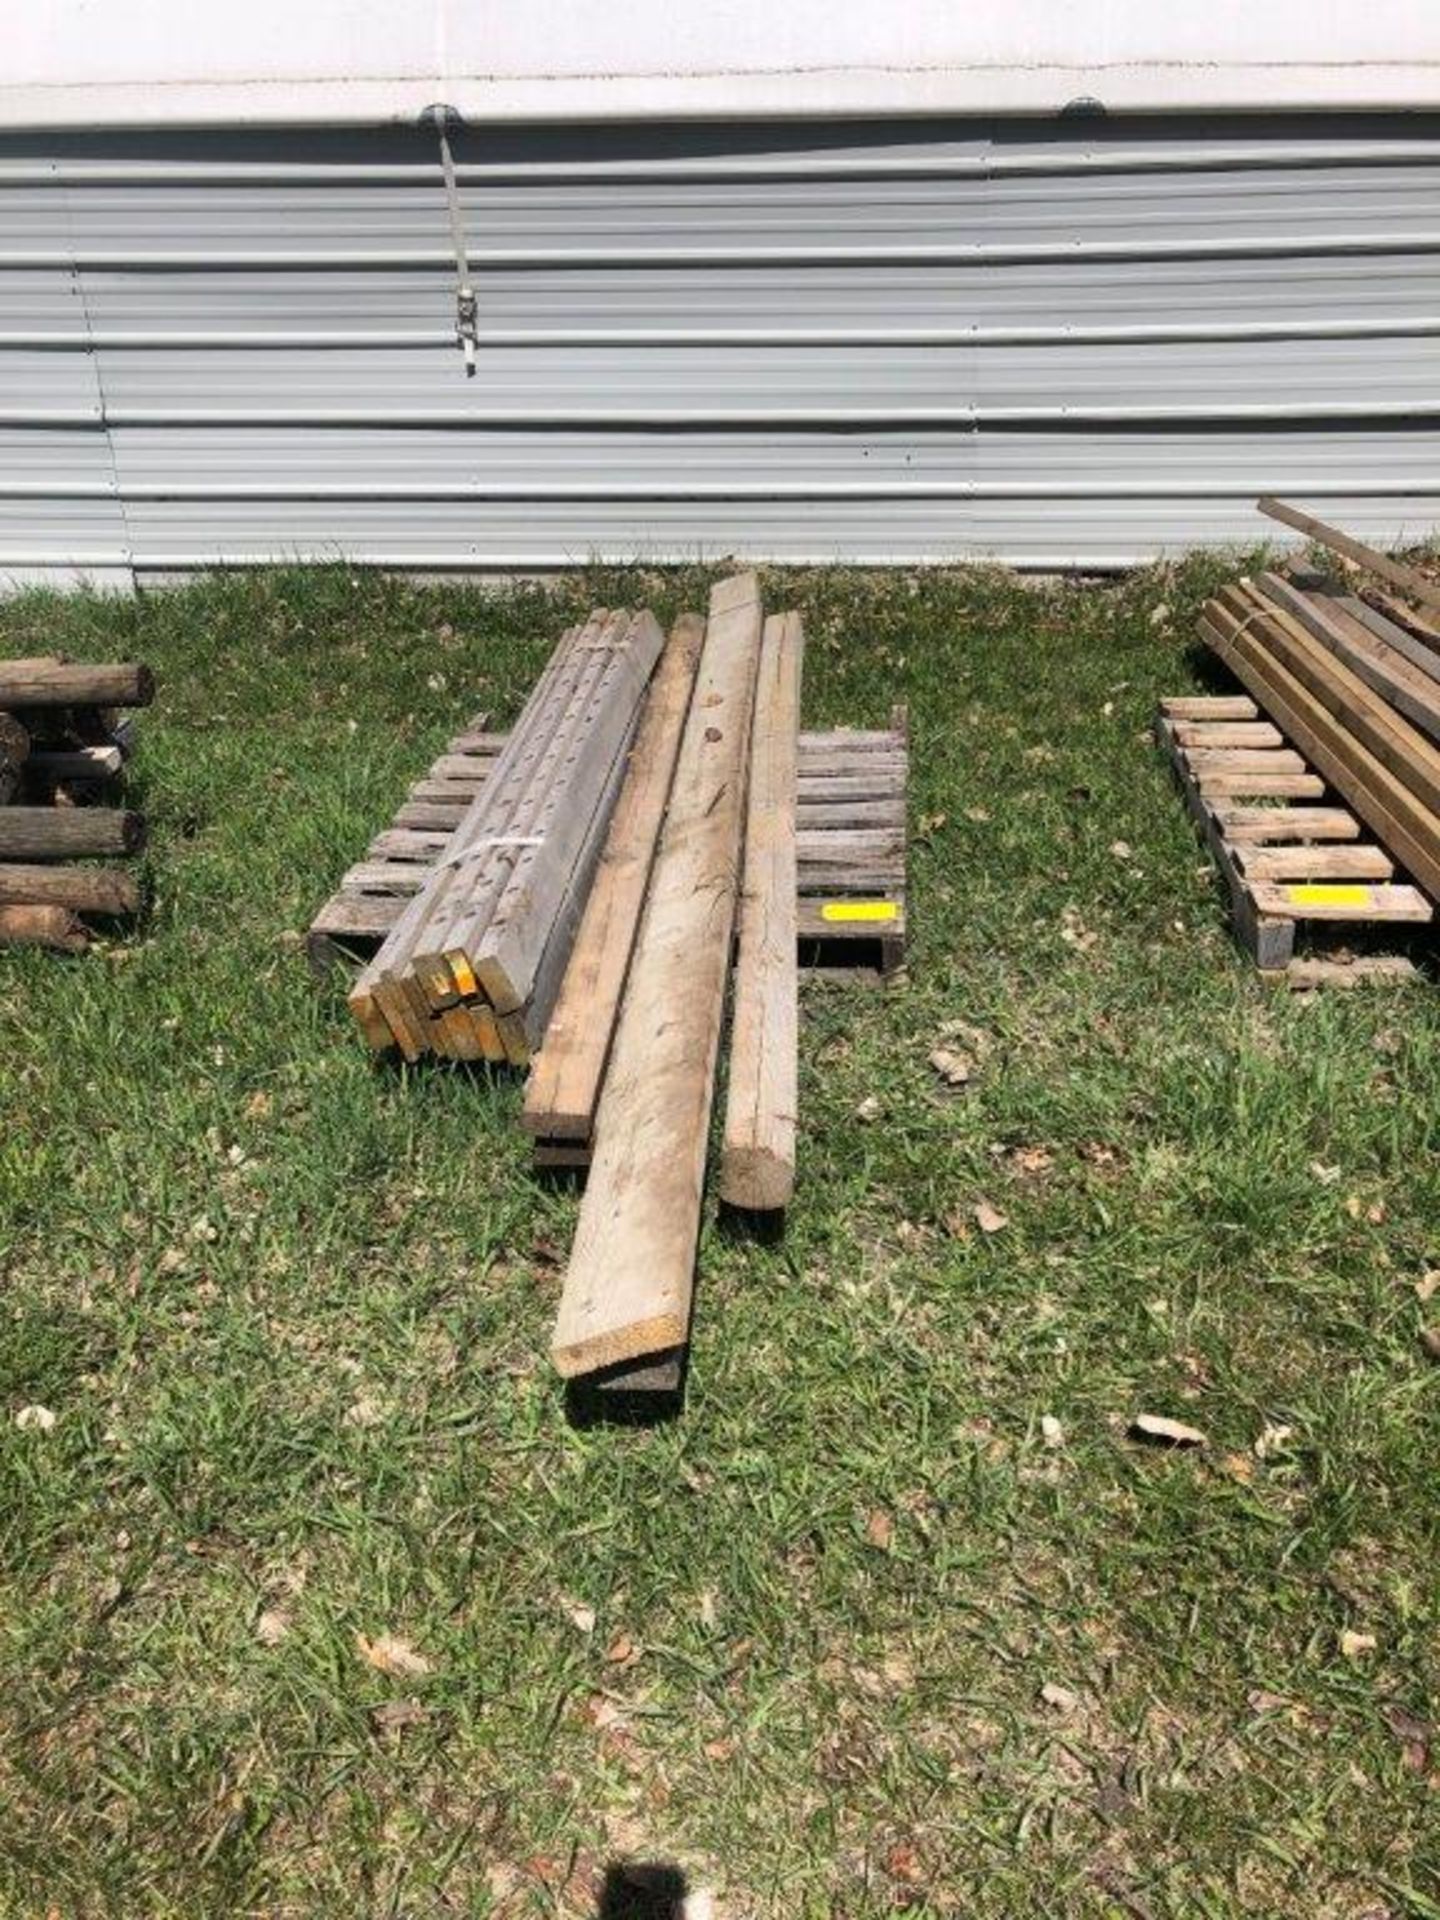 2-6"X6"X12FT TREATED POSTS AND ASSORTED LUMBER - Image 5 of 5